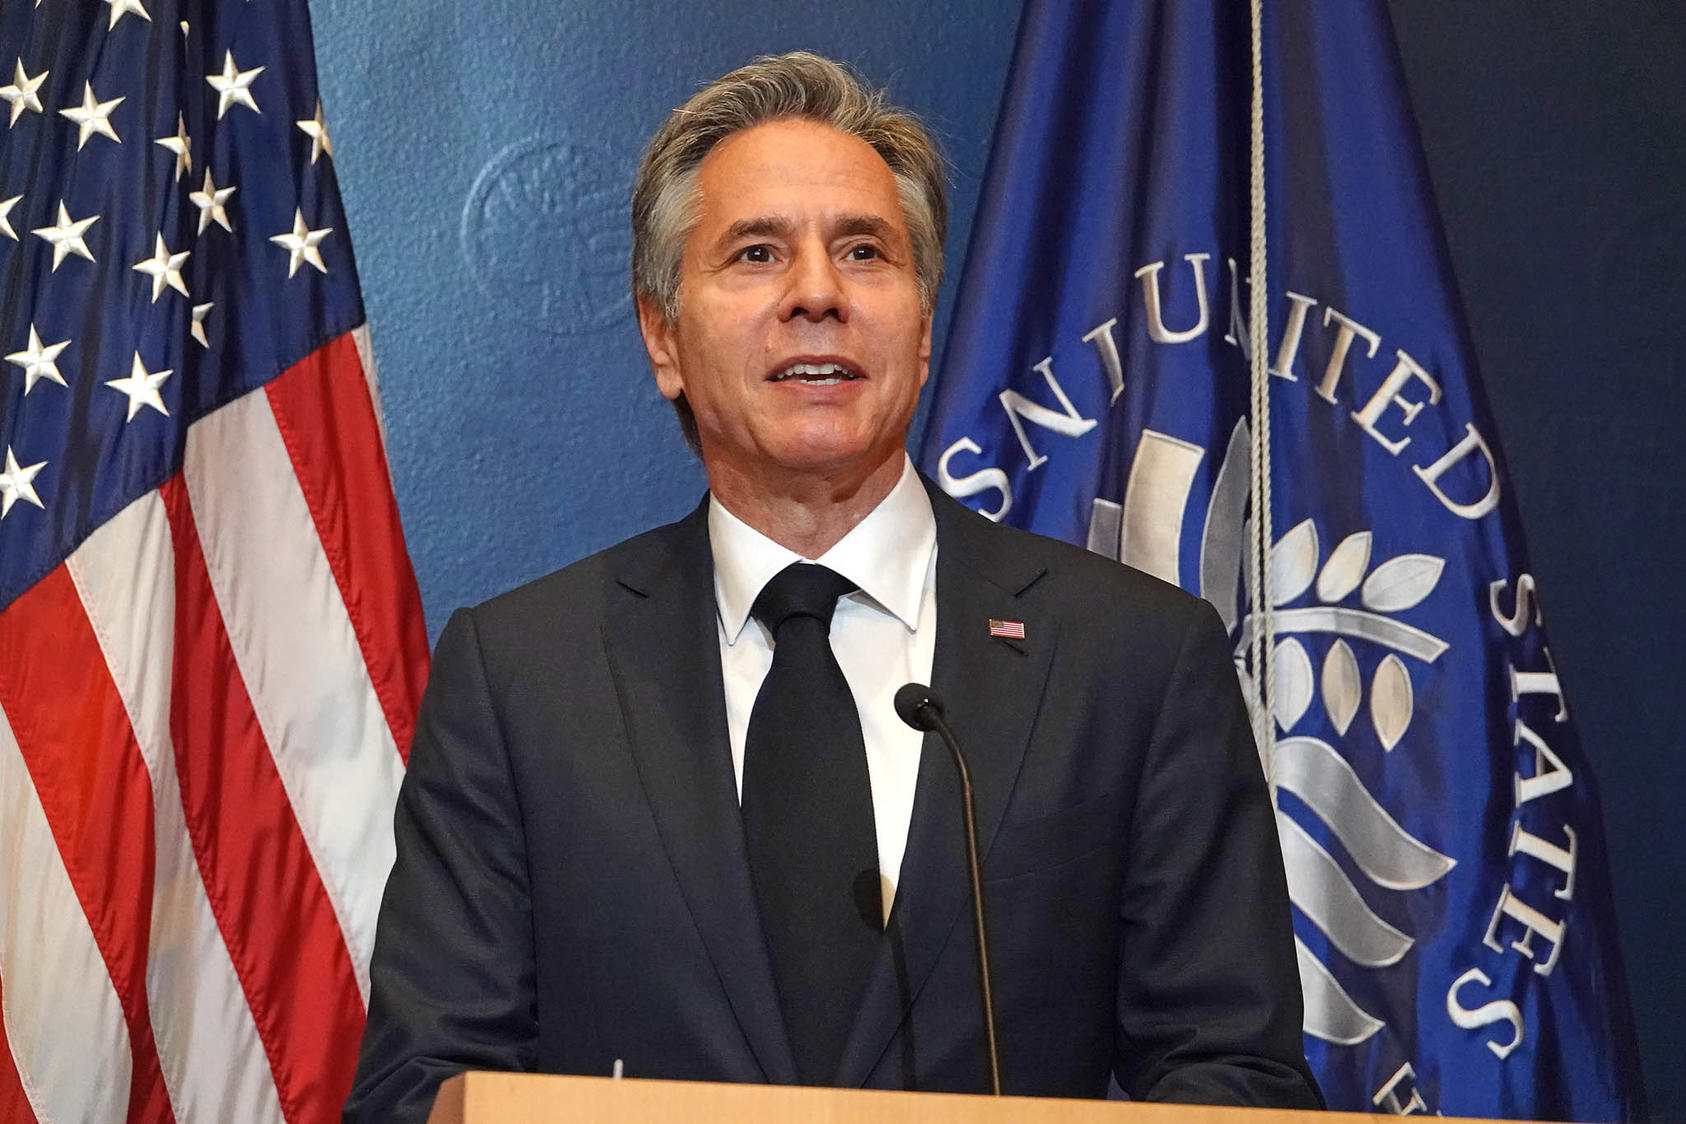 U.S. Secretary of State Antony Blinken speaking at USIP about the launch of the new U.S.-Afghan Consultative Mechanism.